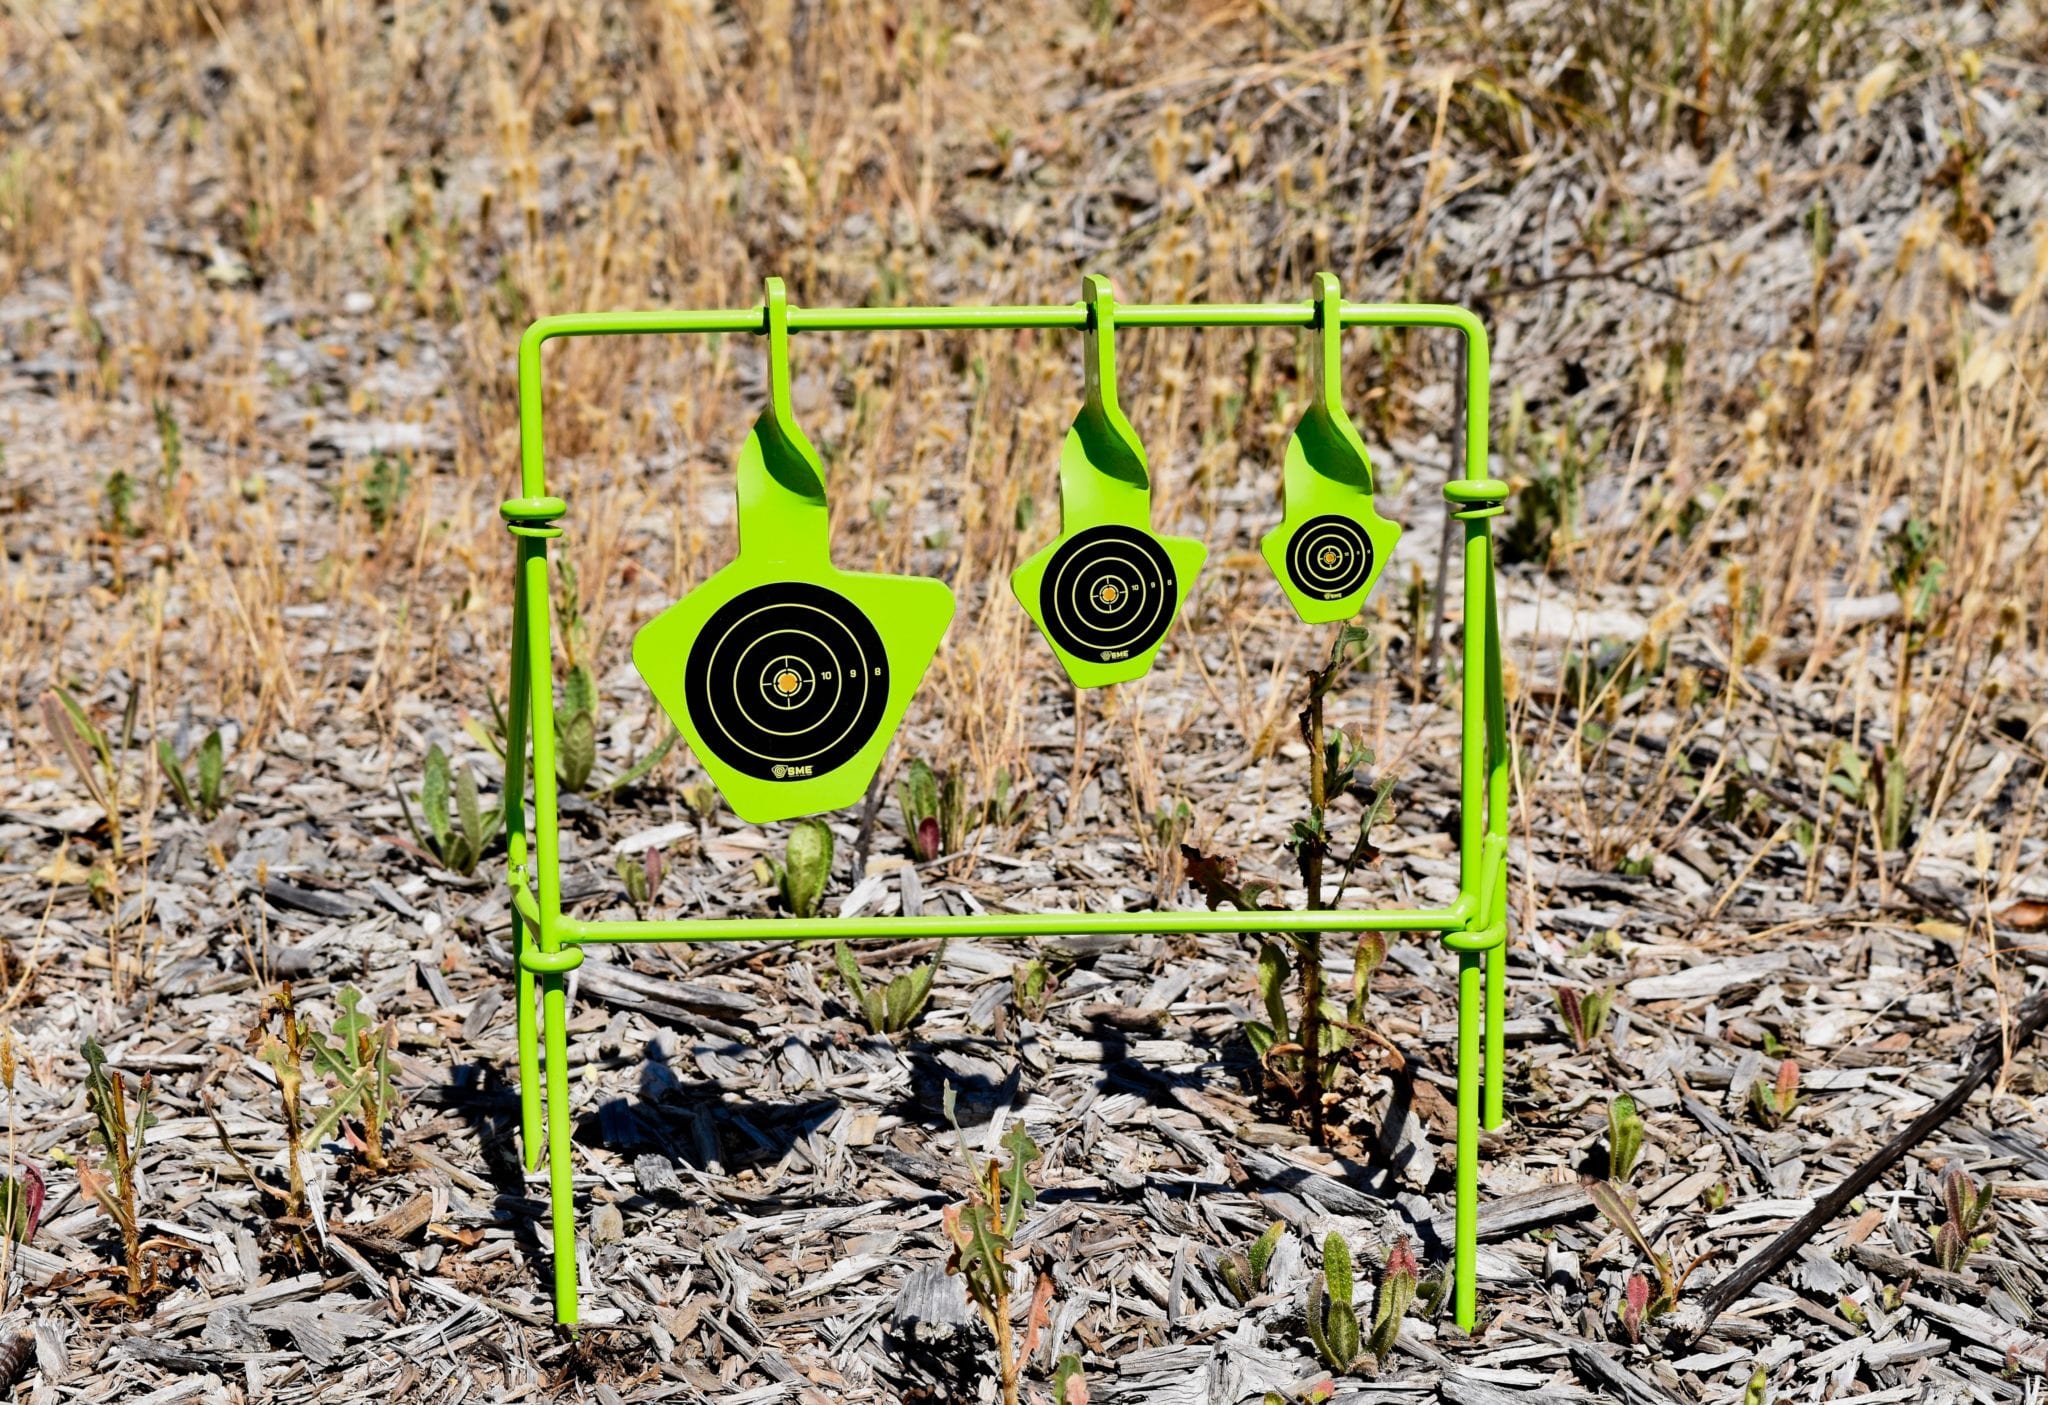 Spinning target system rated for .22 pistol and rifle shooters